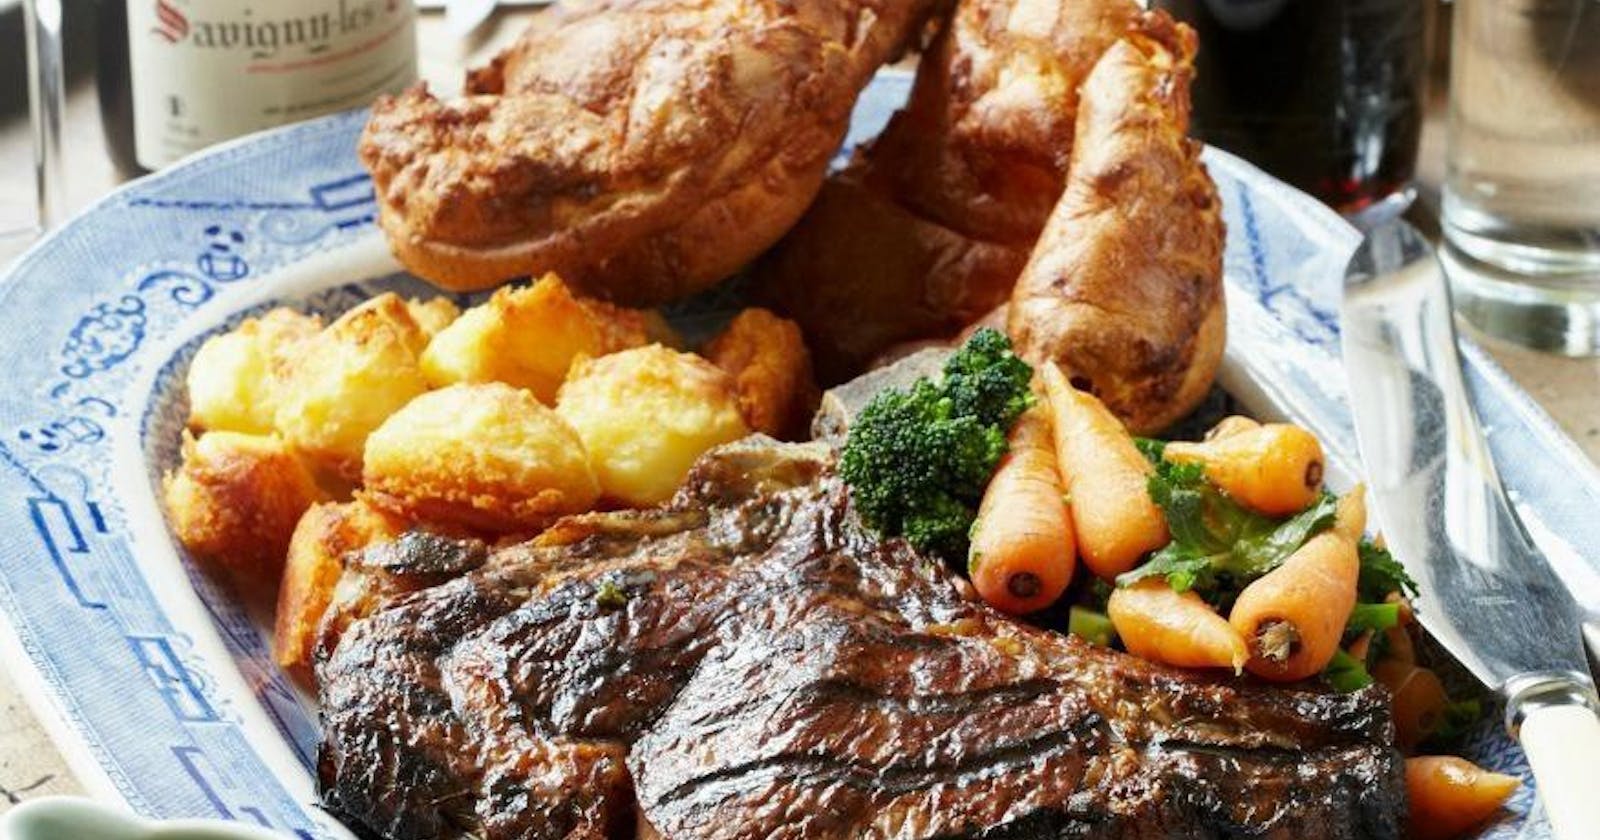 How to cook a great Sunday roast dinner with only one oven